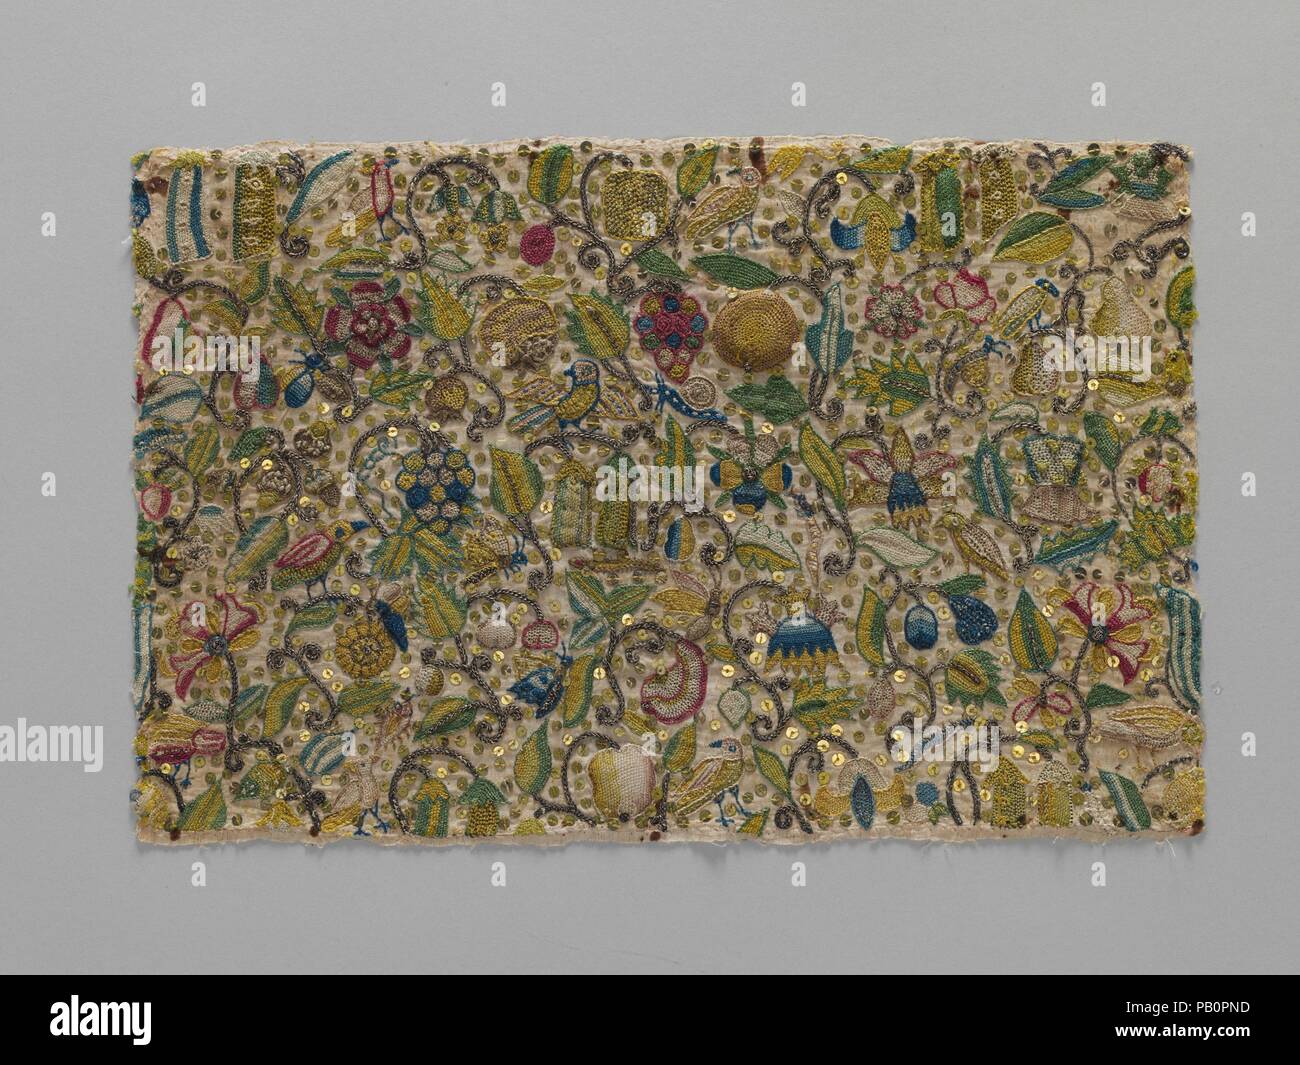 Cushion cover. Culture: British. Dimensions: H. 8 7/8 x W. 13 3/8 inches (22.5 x 34 cm). Date: 1590-1610.  This small panel was probably intended to decorate a small cushion or pillow; these were used in large numbers in interior decoration of the sixteenth and seventeenth centuries. Larger versions would have softened hard wooden seats; smaller examples were used as decoration on sideboards and dressing tables. Some were used as pincushions, as great quantities of pins were used to fasten clothing before the advent of zippers and Velcro. Museum: Metropolitan Museum of Art, New York, USA. Stock Photo